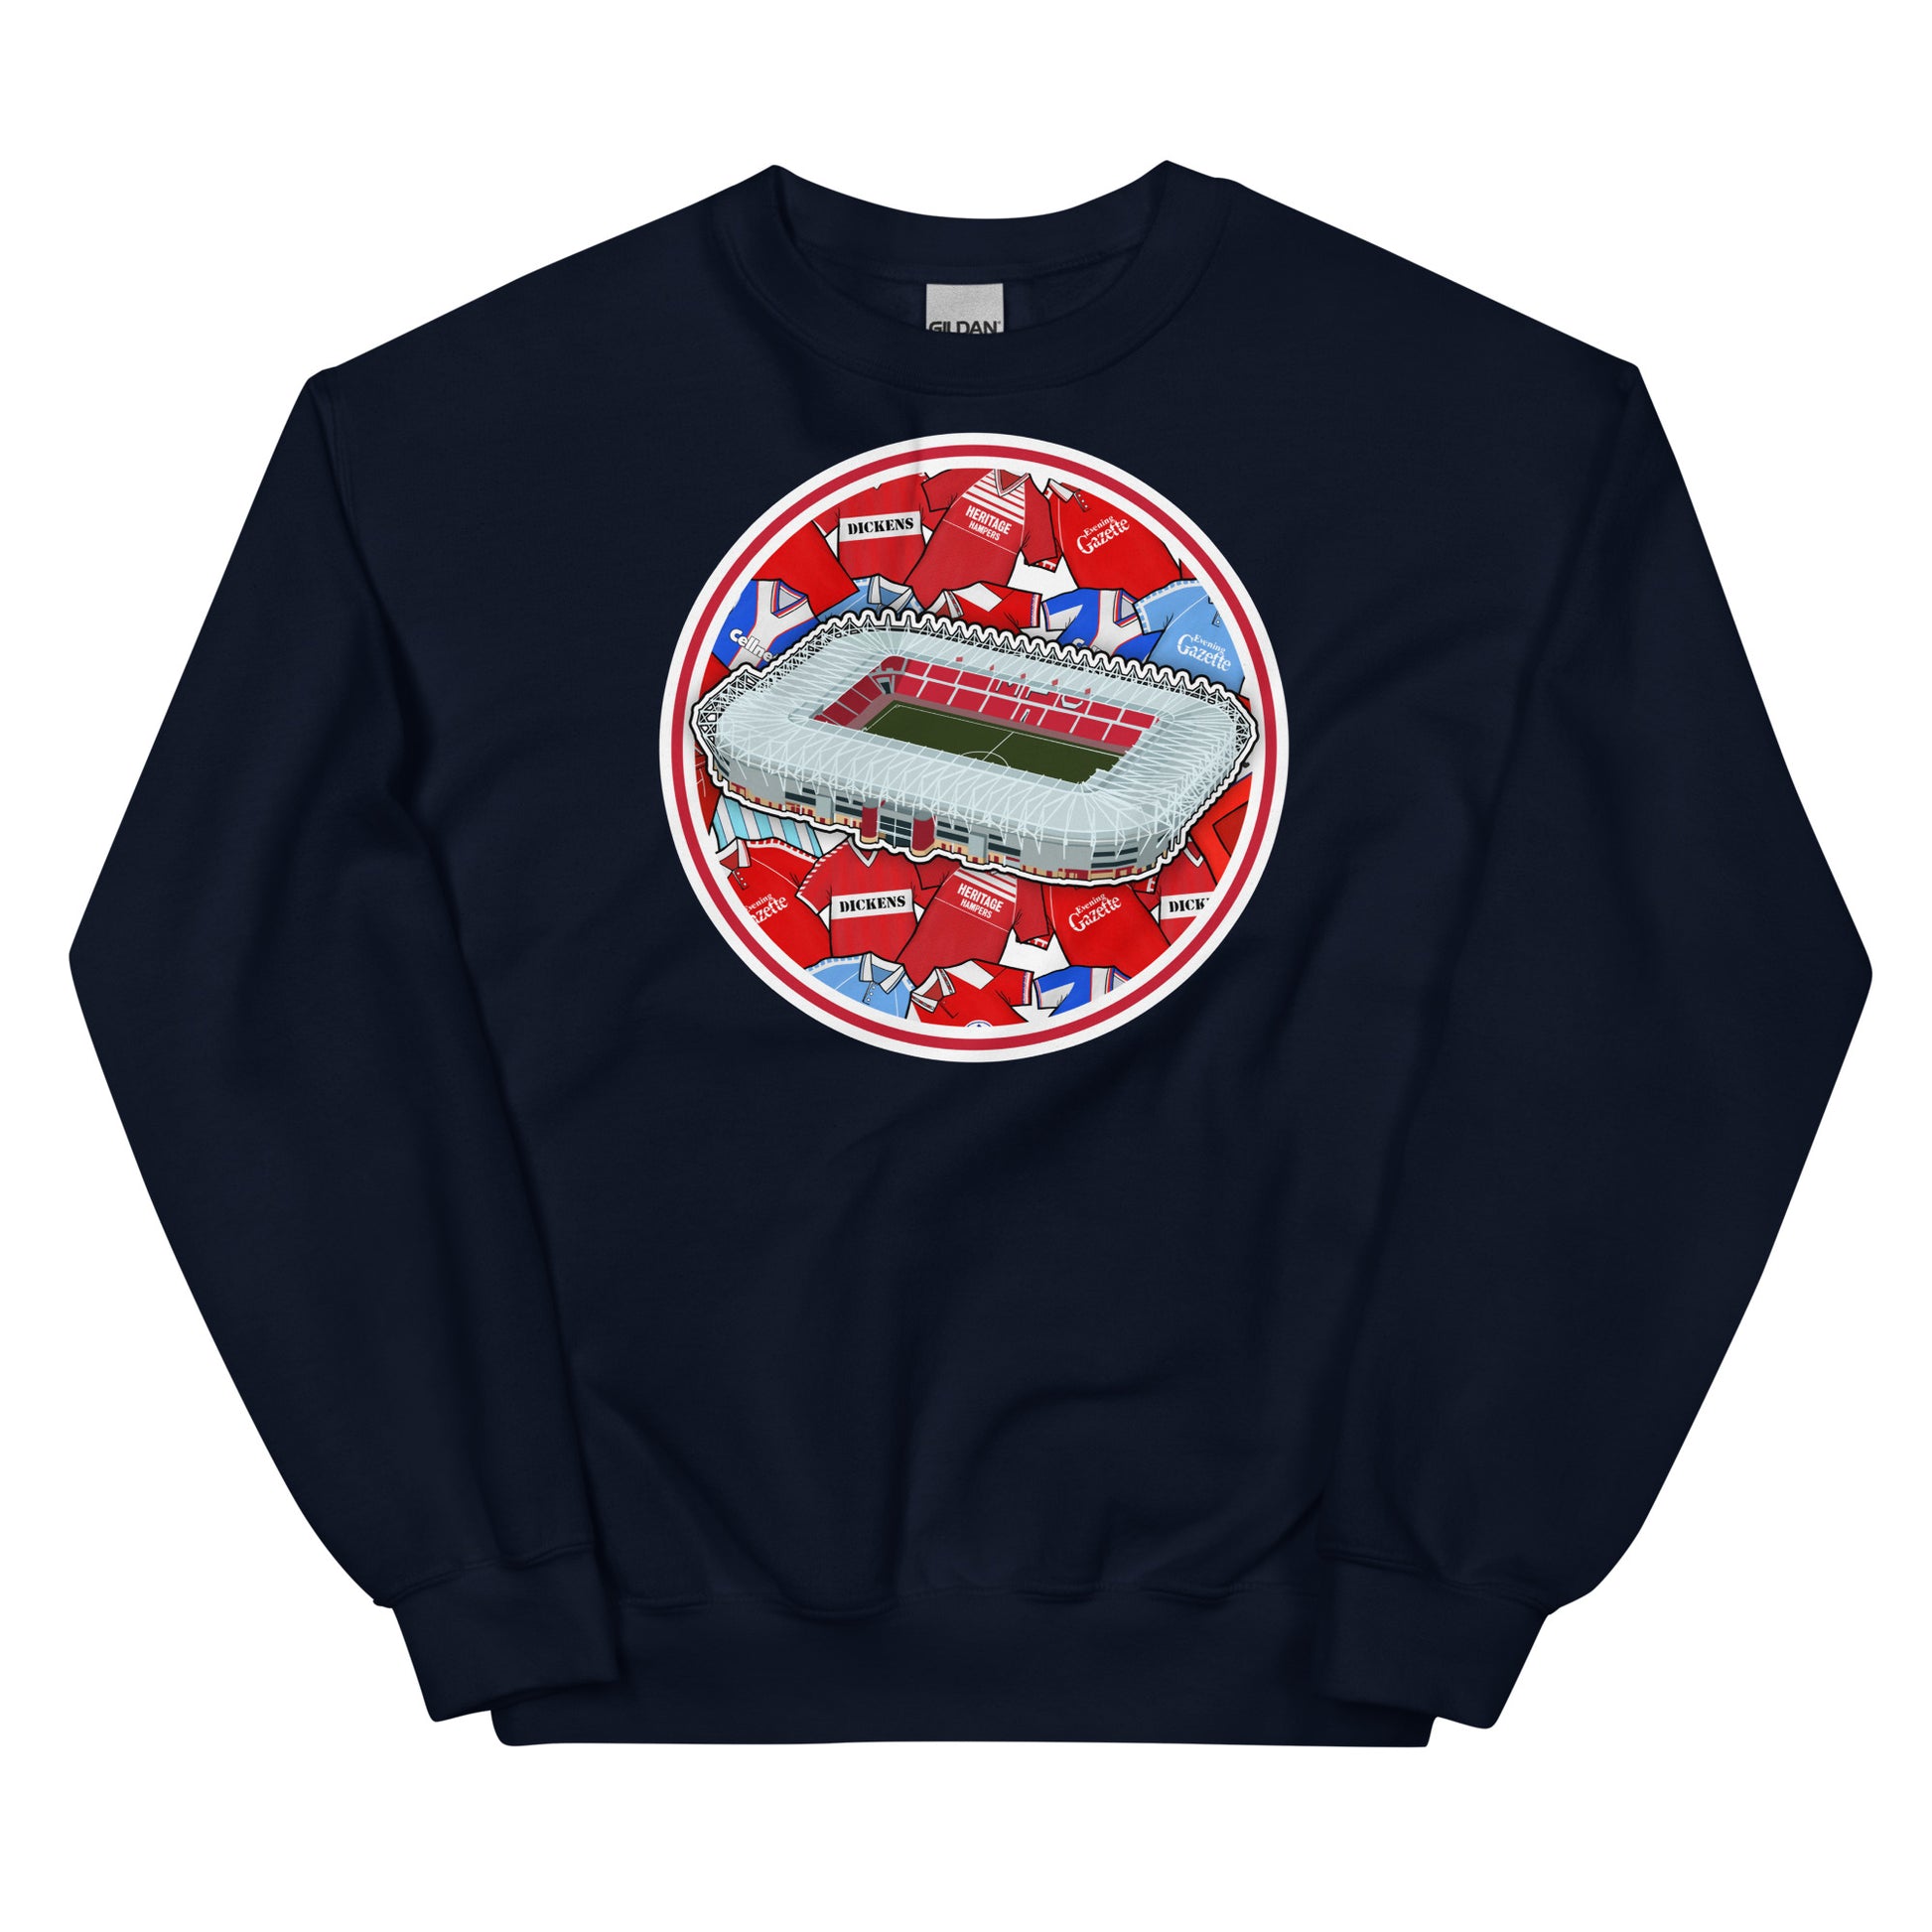 Navy Blue Retro Sweatshirt Inspired by the home of Middlesbrough Football, The Riverside Stadium in North Yorkshire!